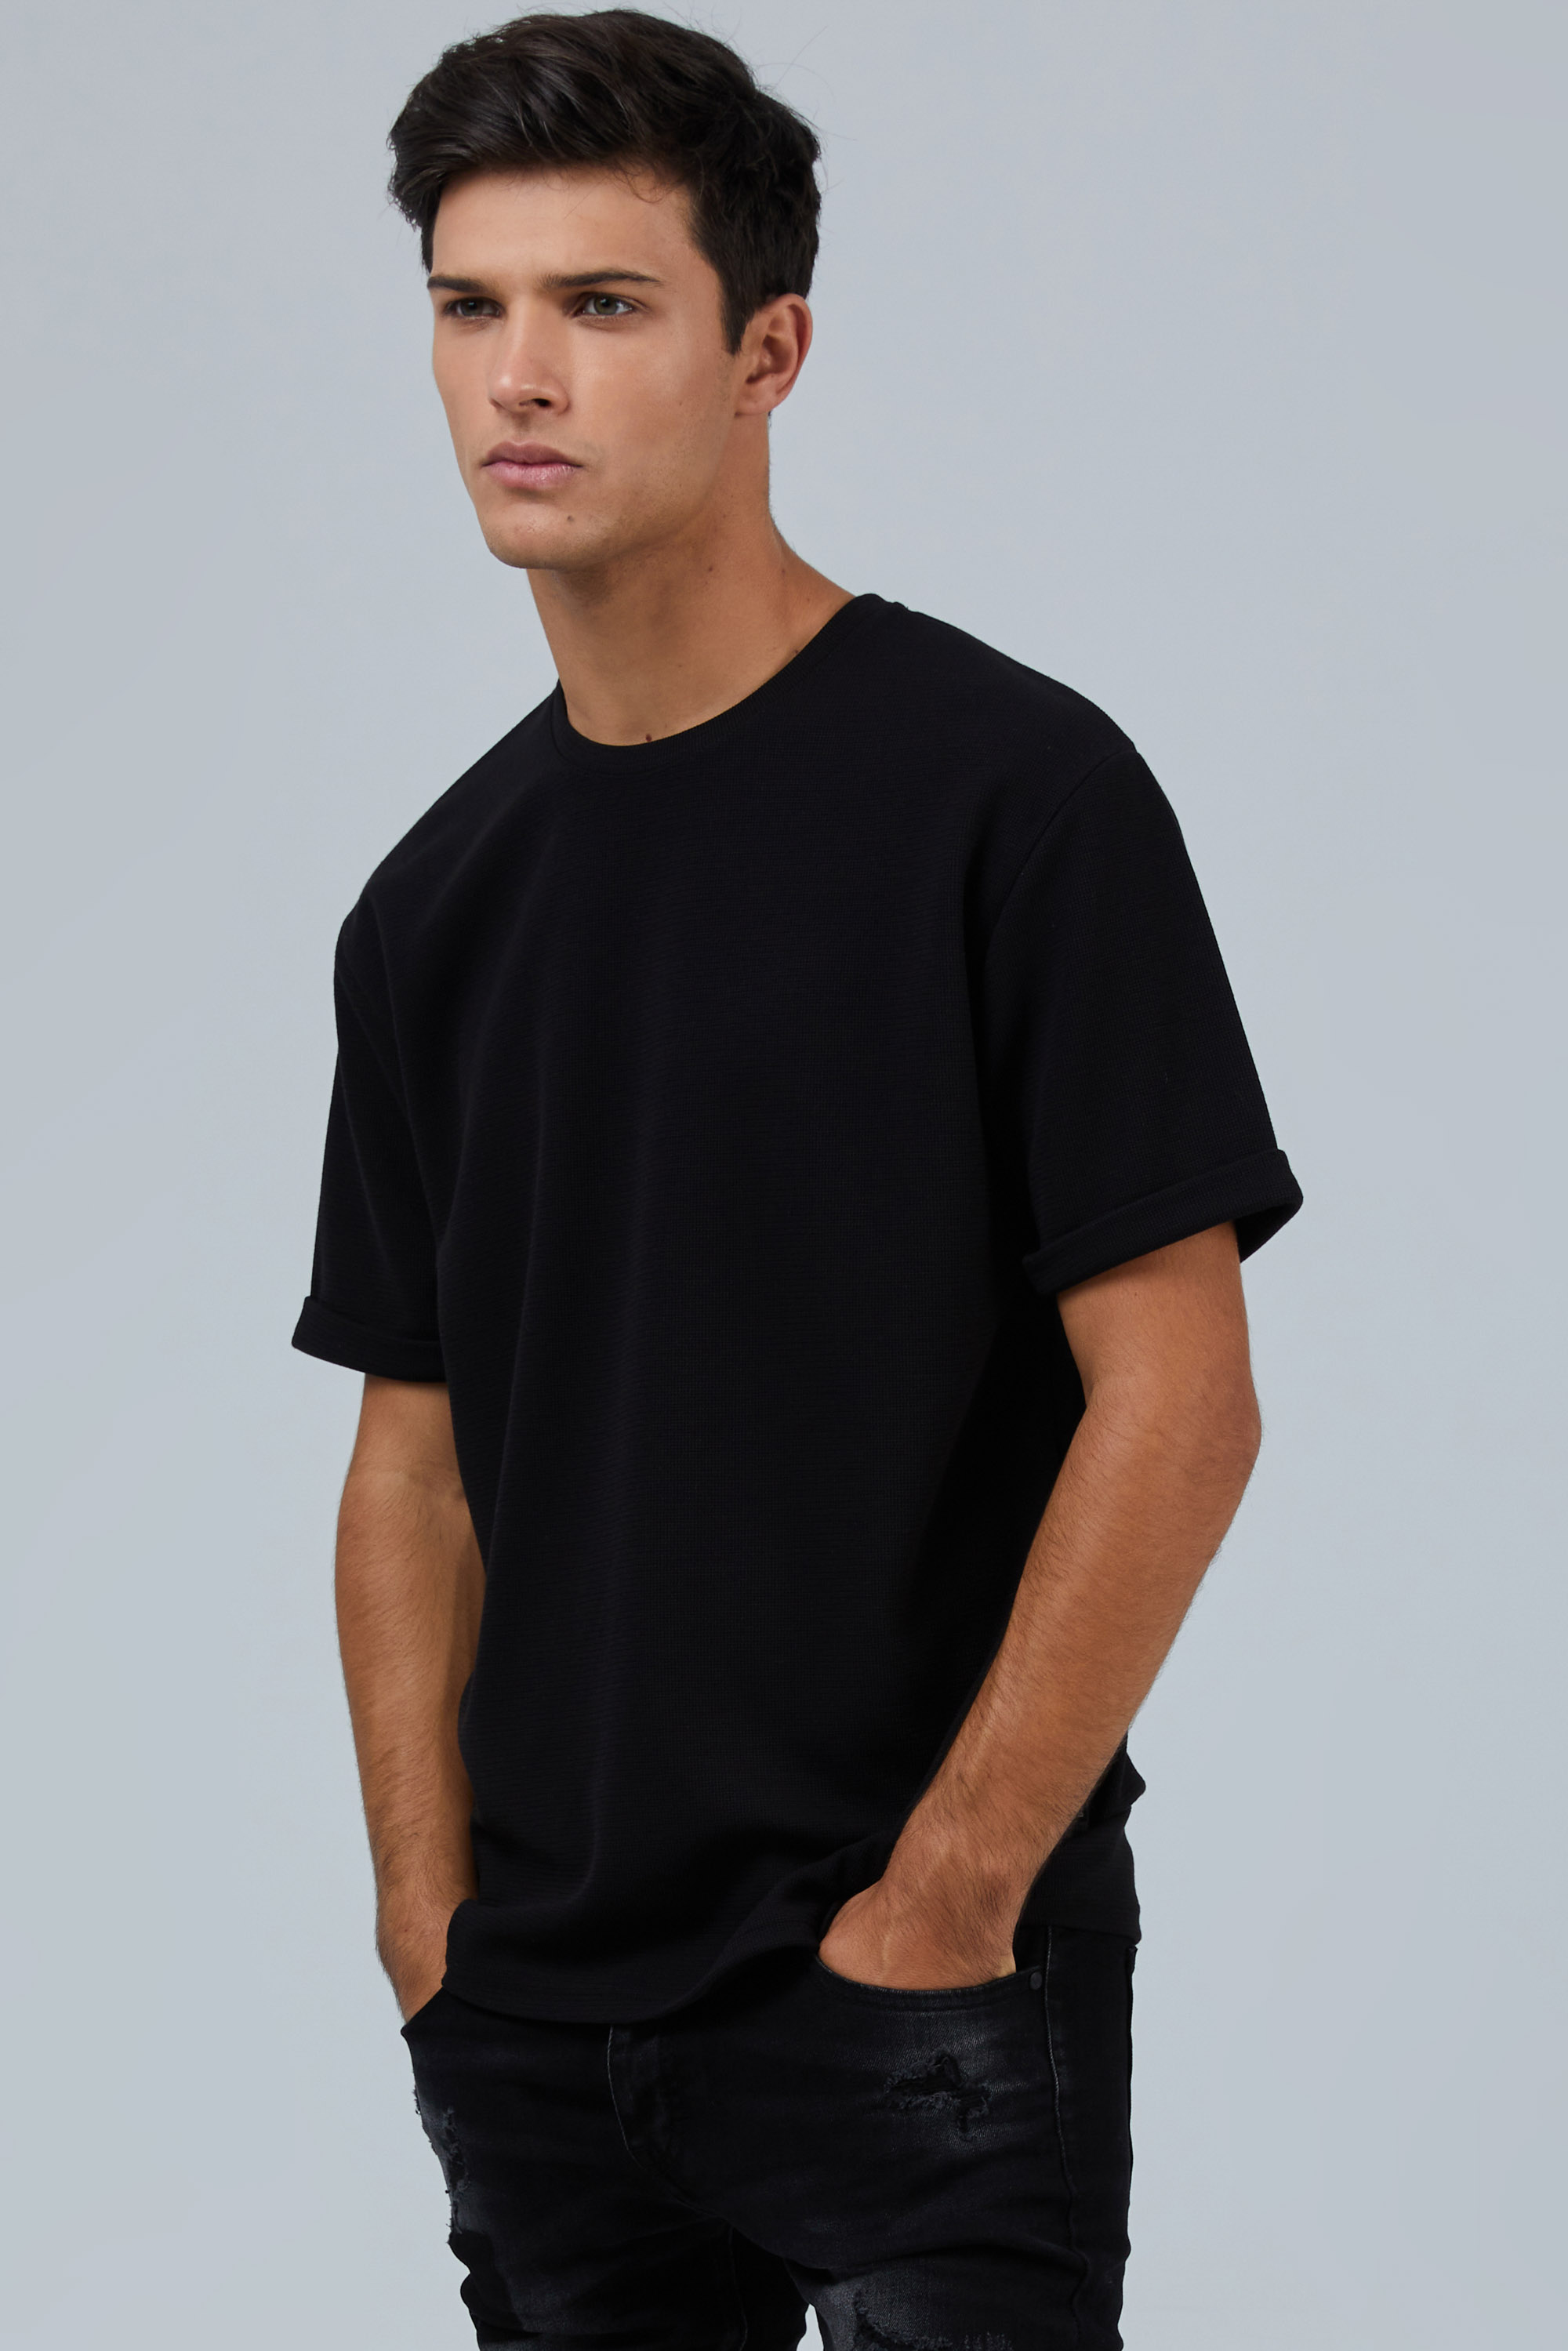 Textured Black In Drop Shoulder And Rolled-Up Sleeve | Aristoteli Bitsiani